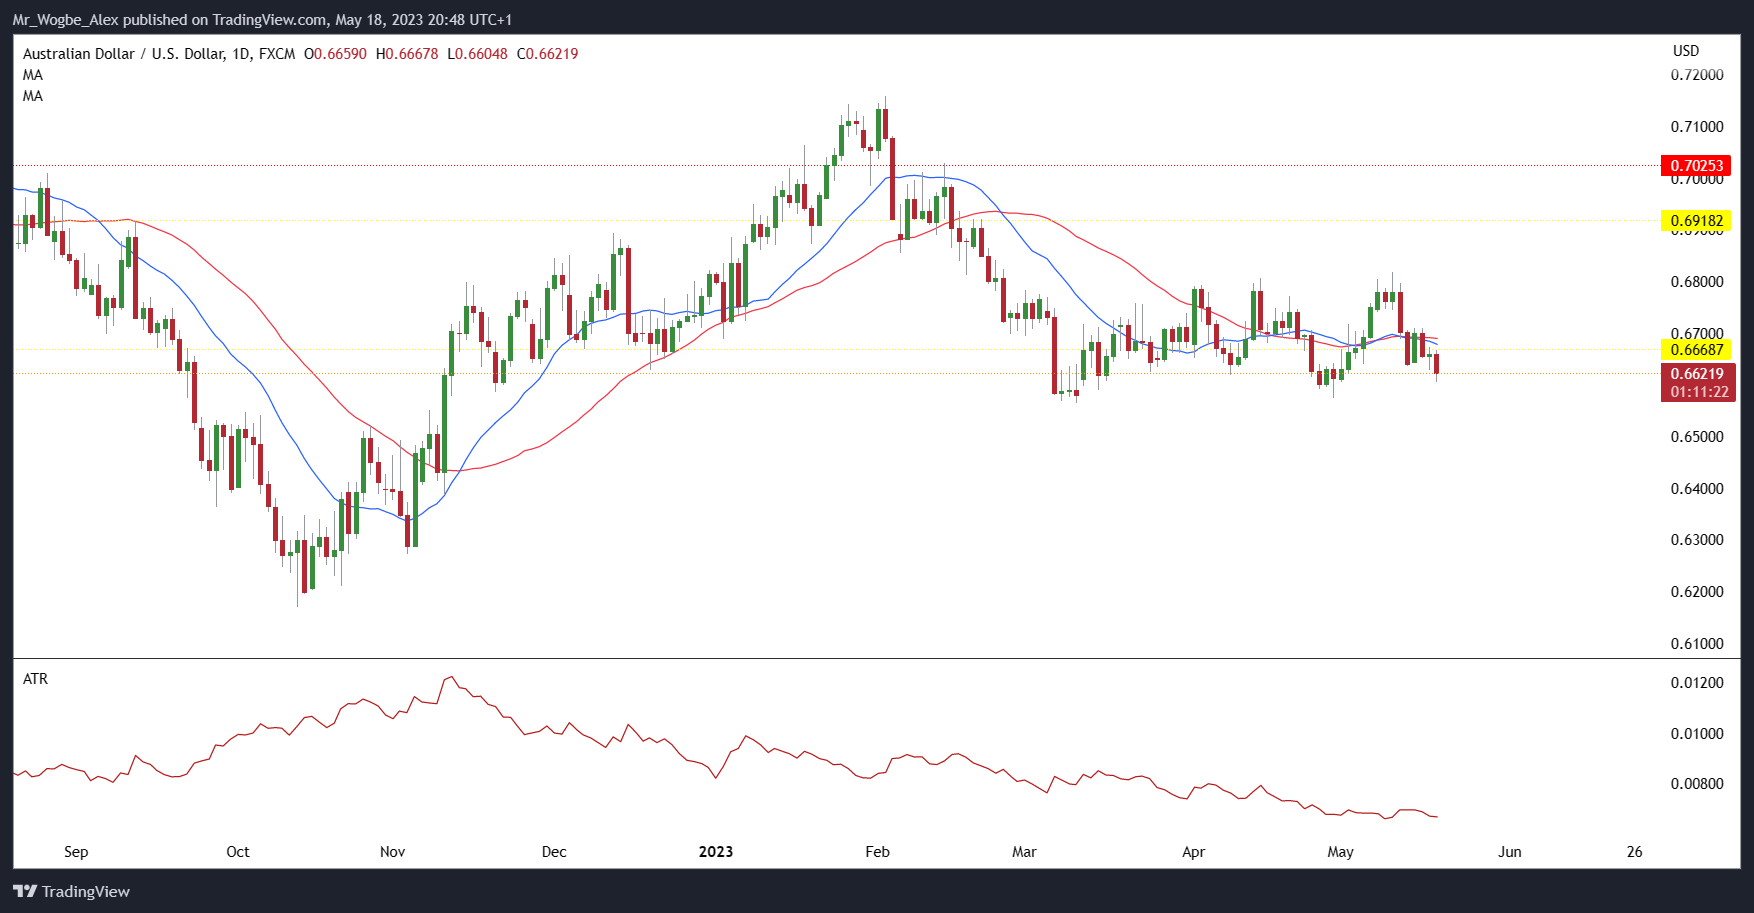 AUD/USD Daily Chart on TradingView